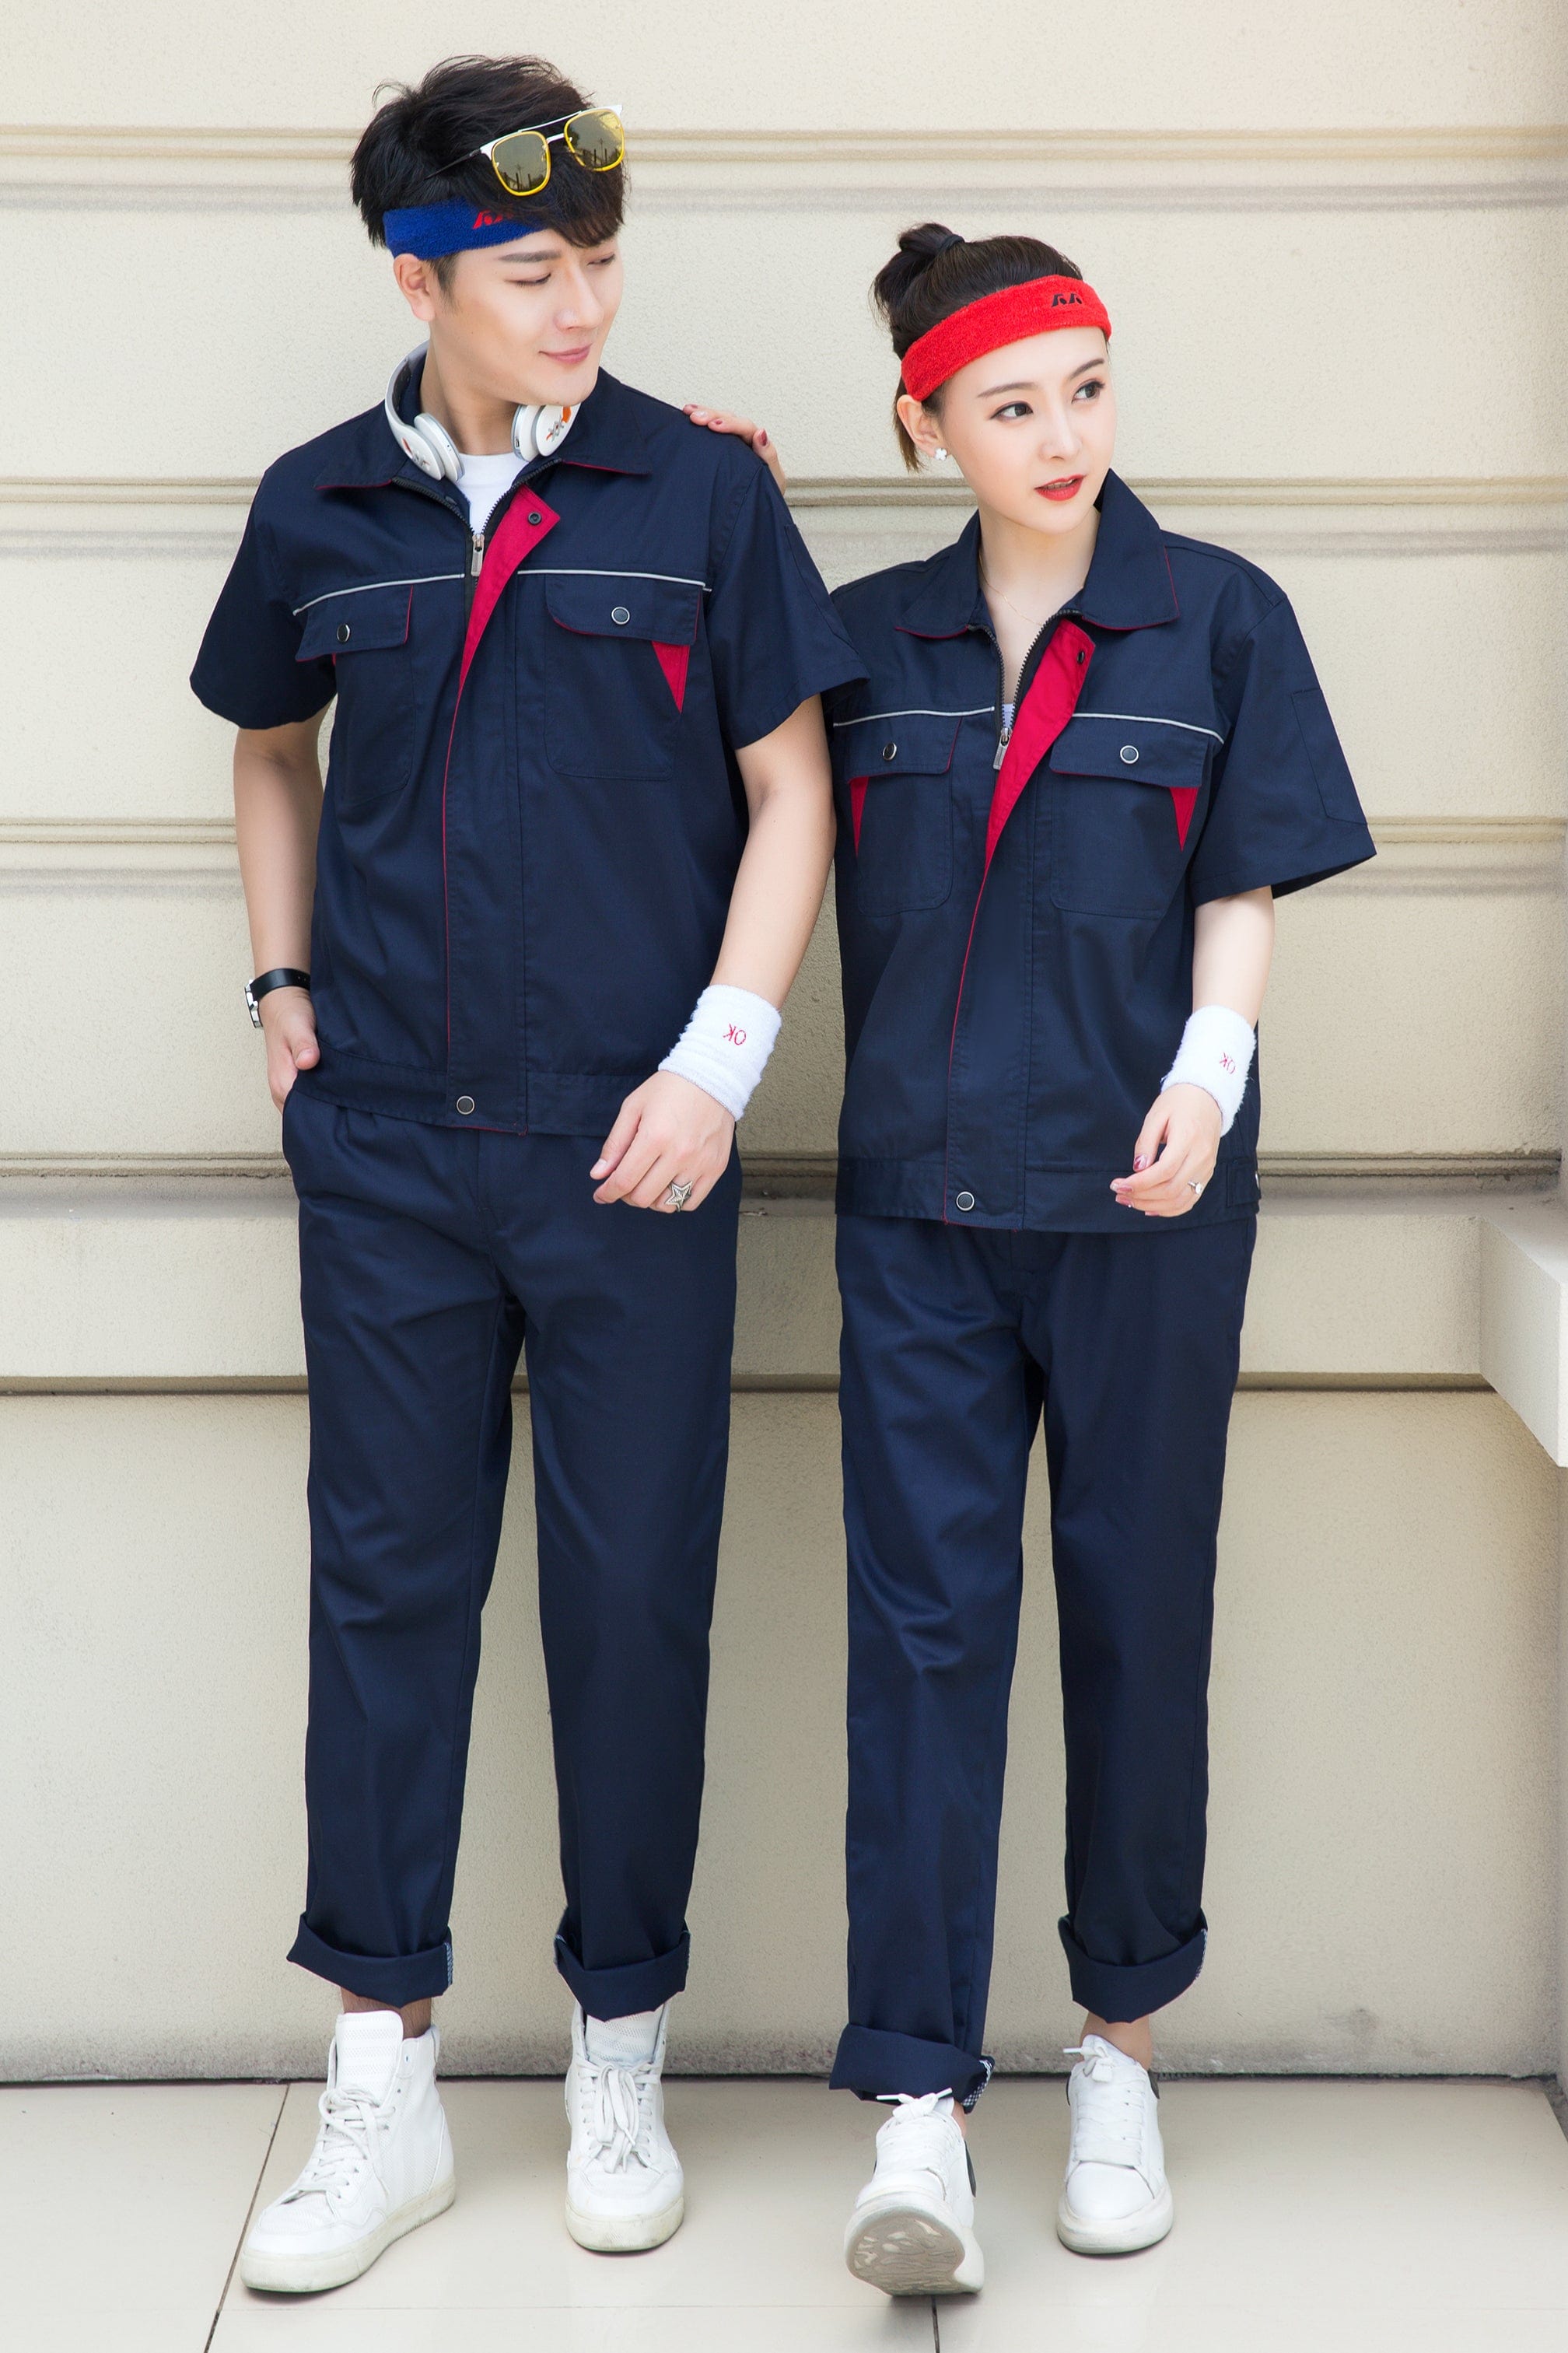 Corals Trading Co. 可樂思百貨商行 涤棉 Short-sleeved polyester cotton overalls for summer SD-S701